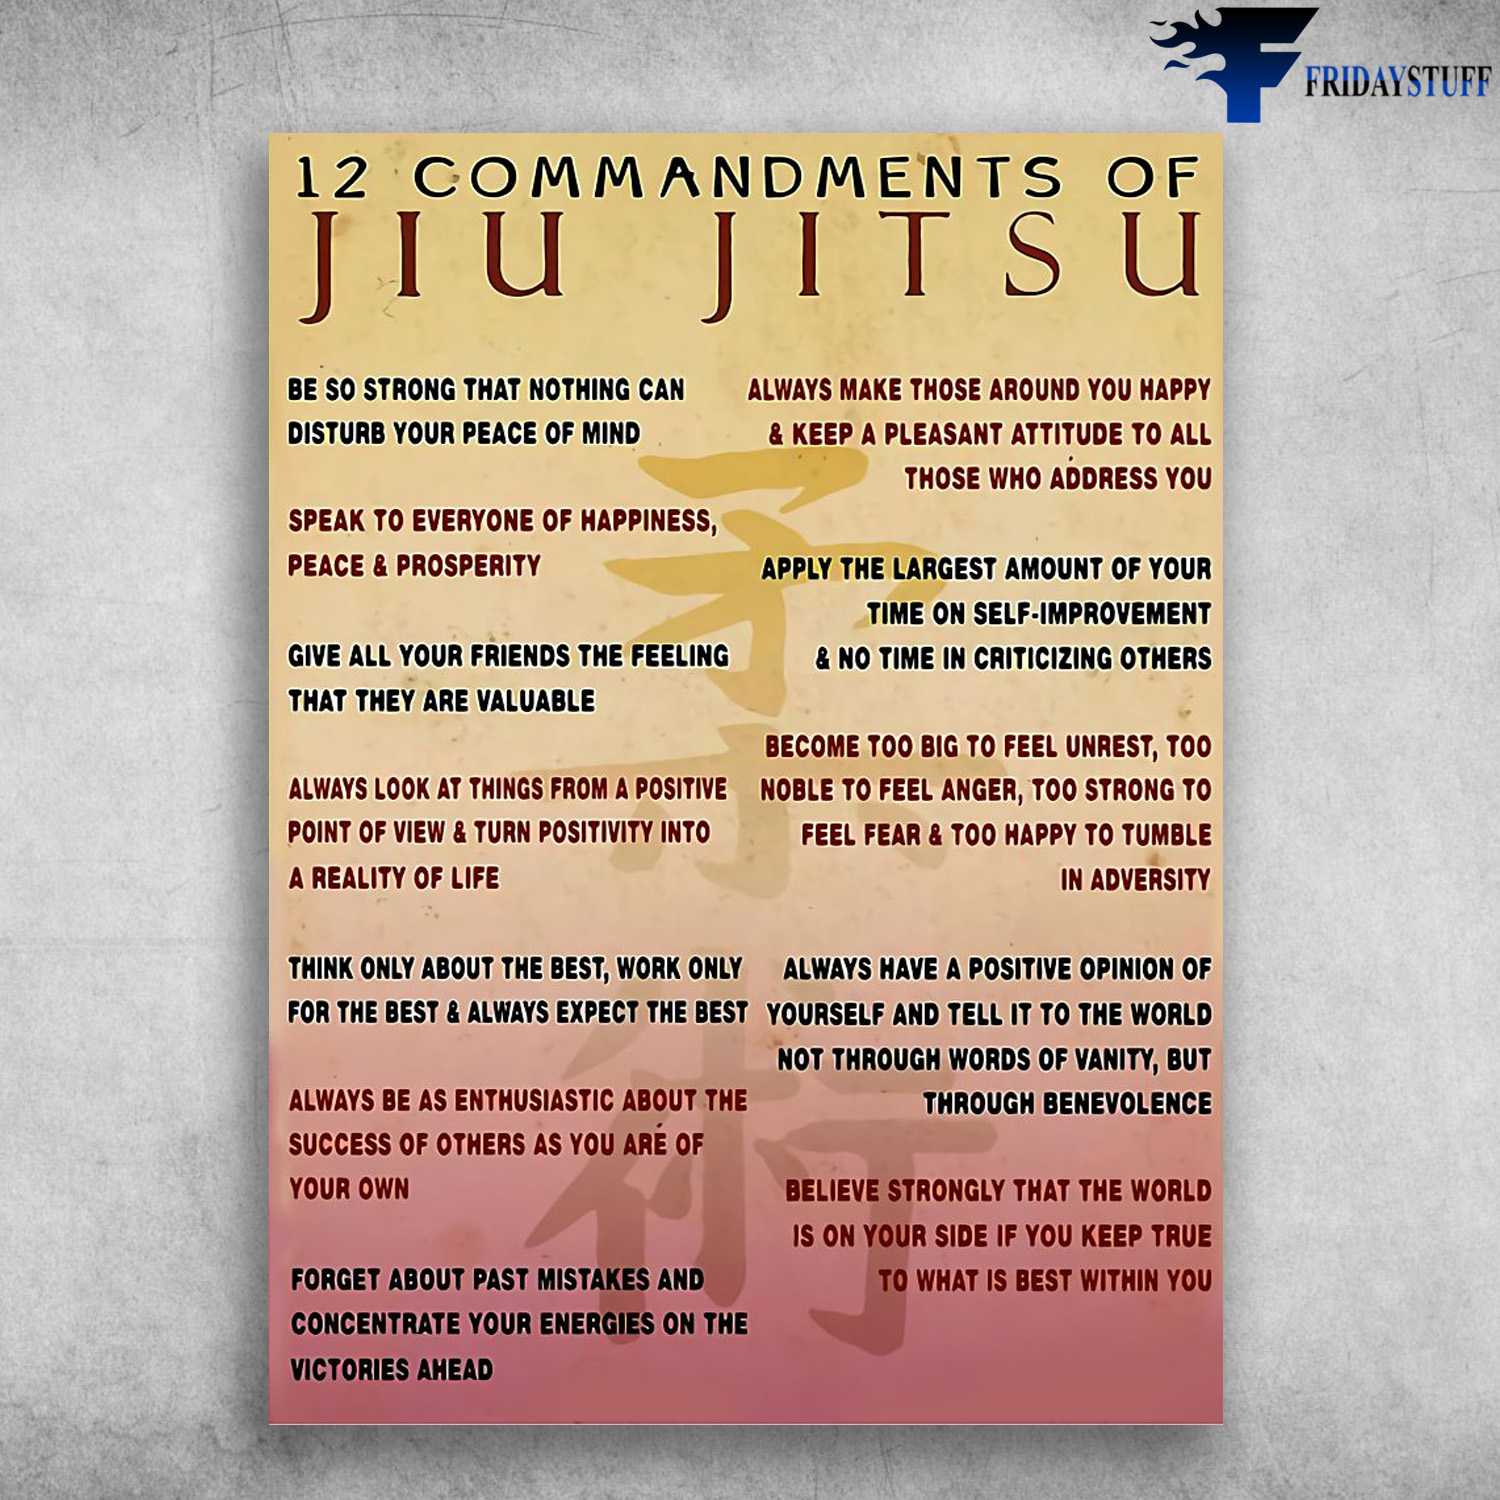 Jiu Jitsu Poster, 12 Commandments Of Jiu Jitsu, Be Strong Than Nothing Can, Disturb Your Peace Of Mind, Always Make Those Around You Happy, And Keep A Pleasant Attitude To All, Those Who Address You